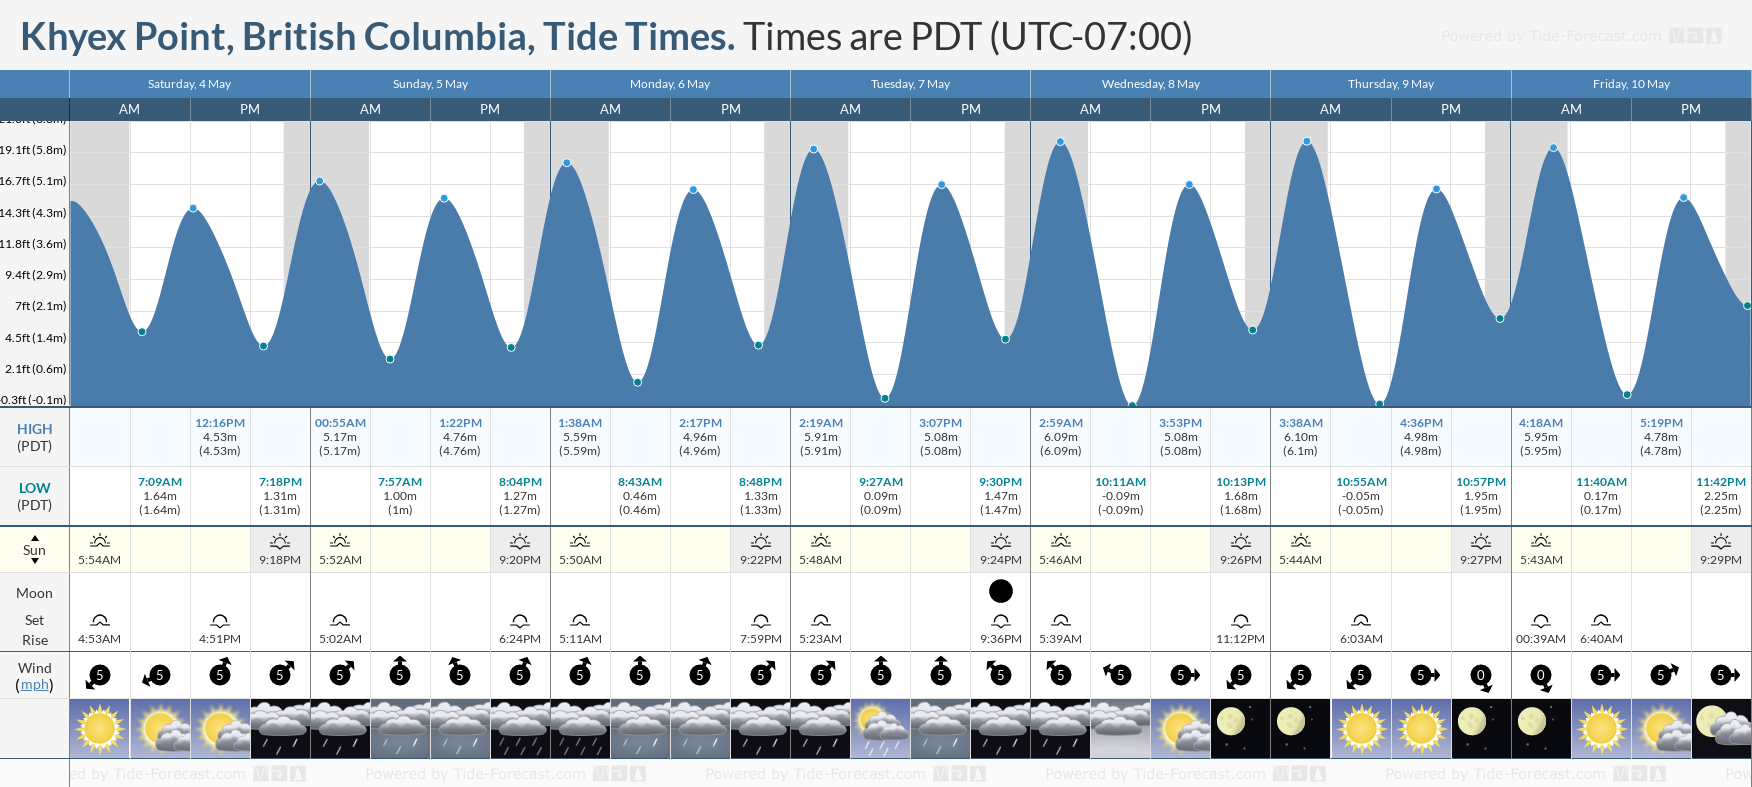 Khyex Point, British Columbia Tide Chart including high and low tide tide times for the next 7 days